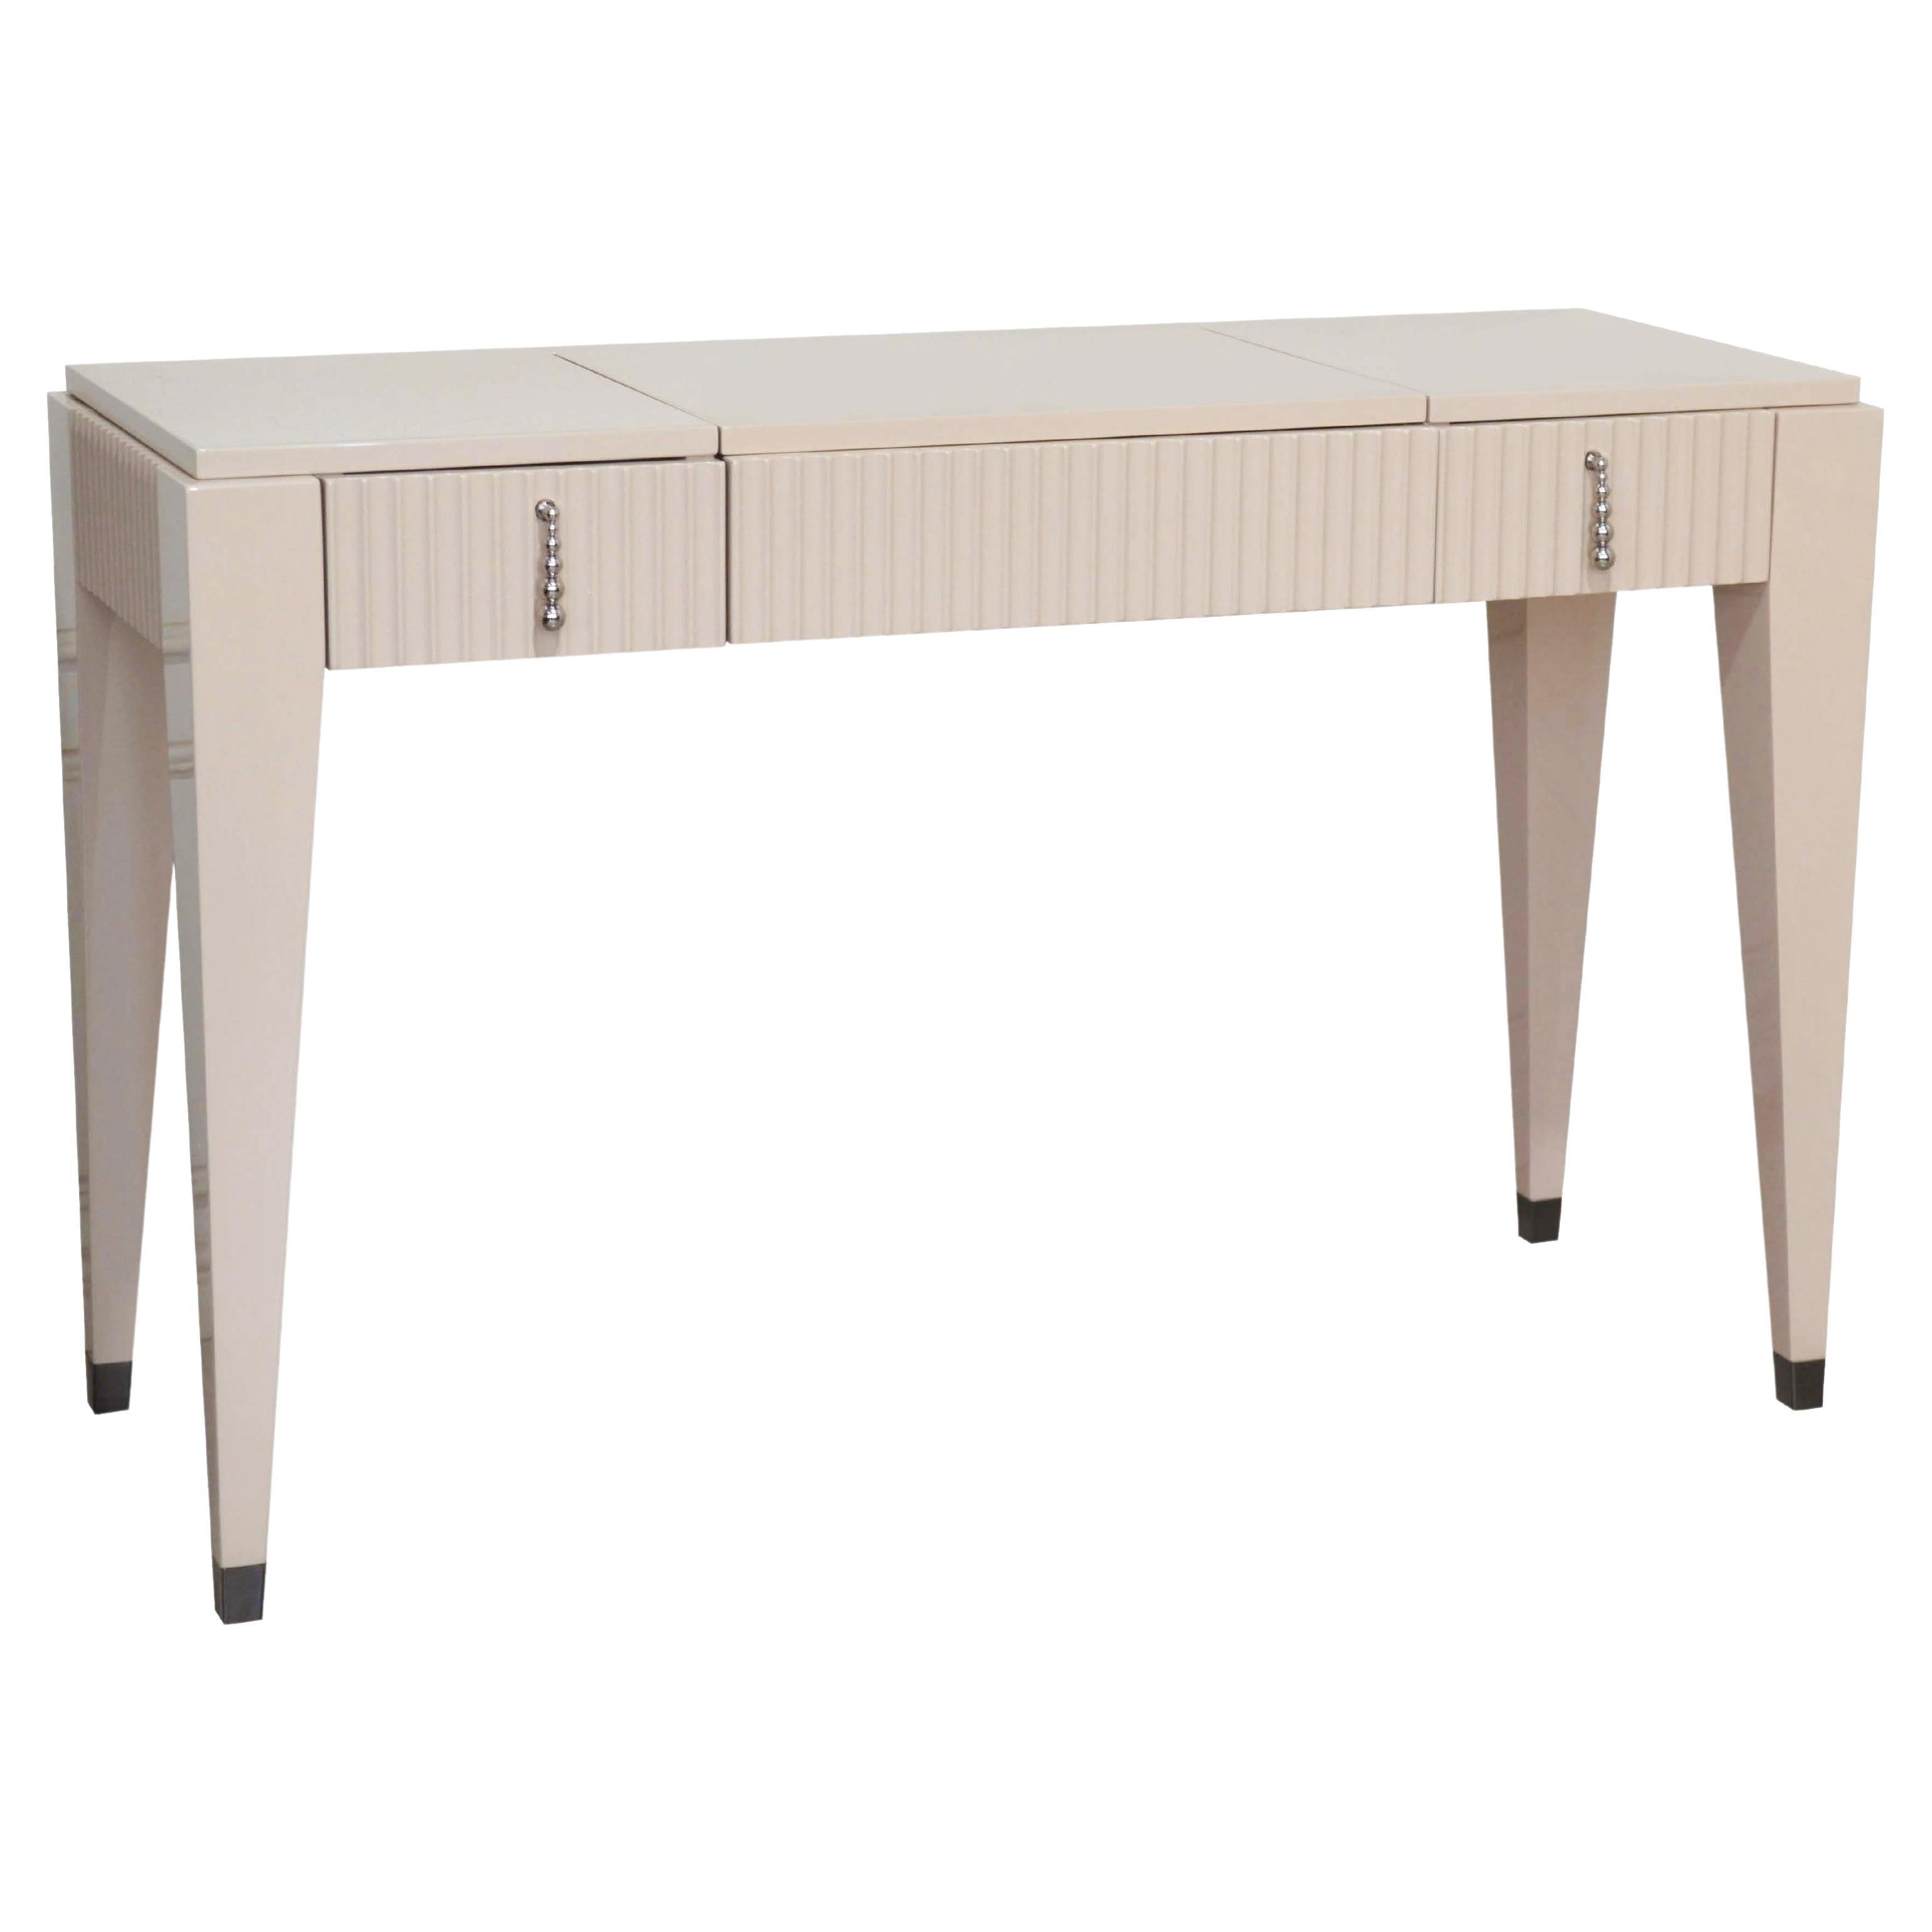 Italian Vanity Table in Beige/Cappuccino/Cream Laquered with Two Drawers For Sale